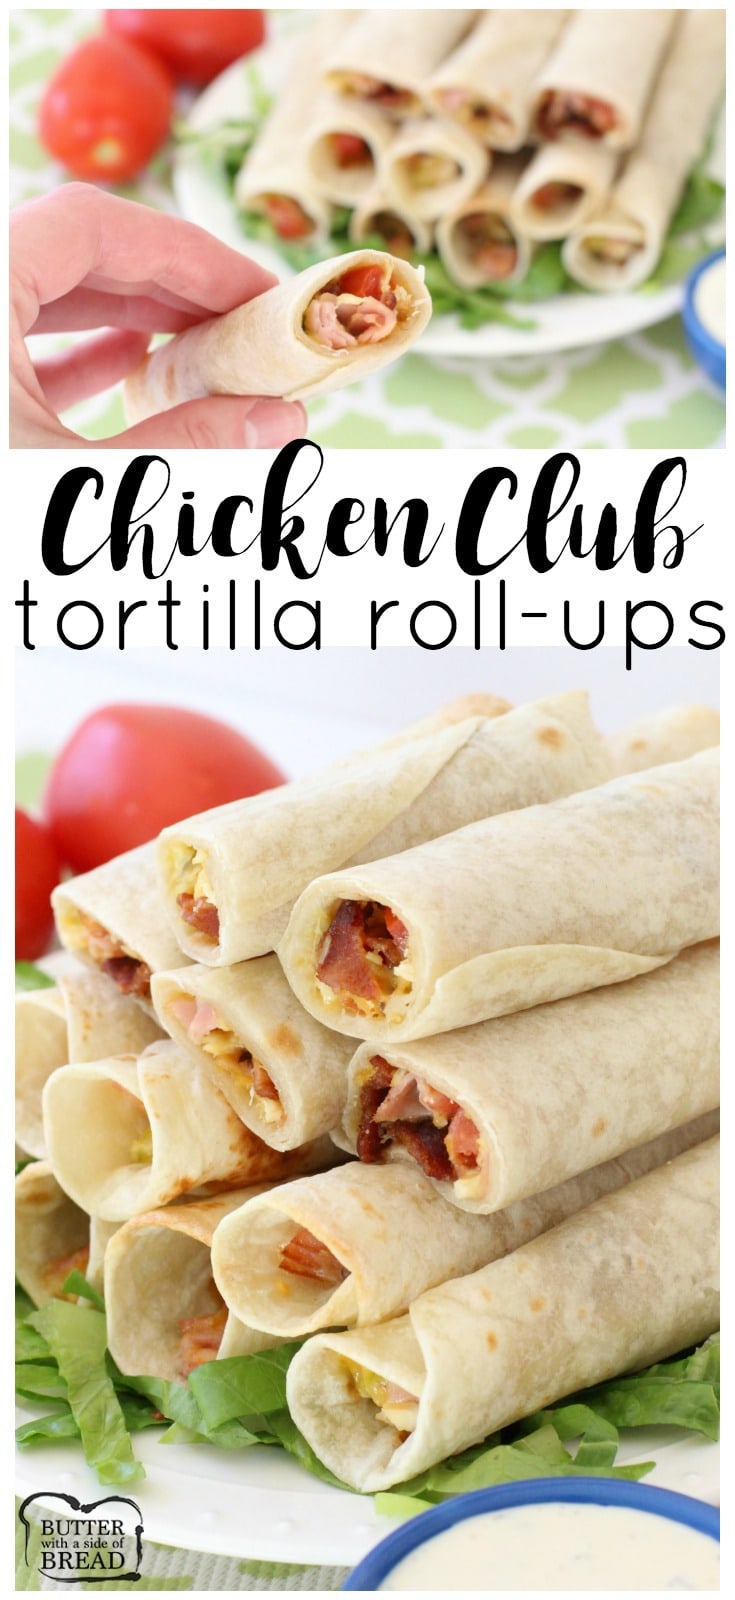 Chicken Club Roll-Ups are tasty, easy appetizers made from chicken, bacon, cheese & avocado rolled in a fresh tortilla. Chicken Club made simple! 